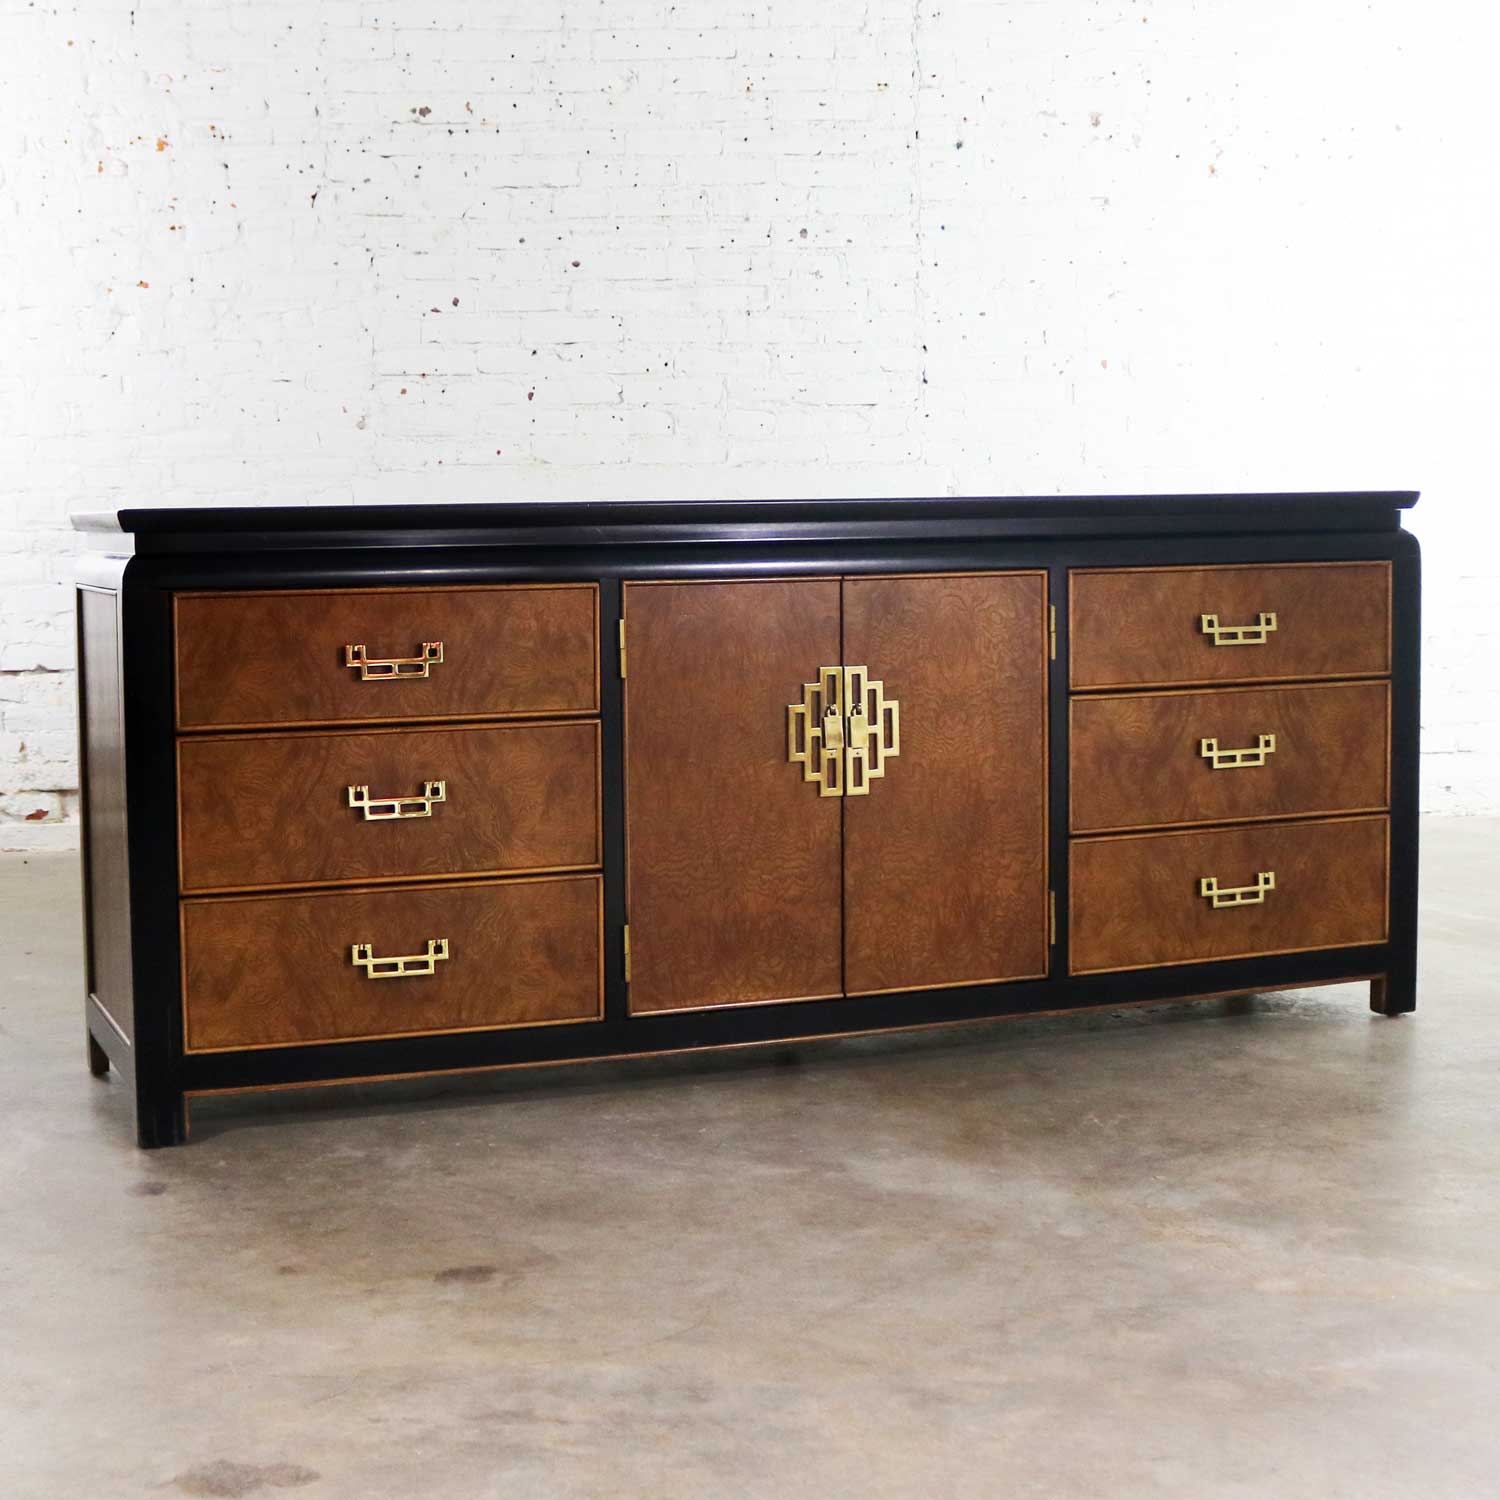 Vintage Chin Hua Low Dresser or Credenza by Raymond K. Sobota for Century Furniture